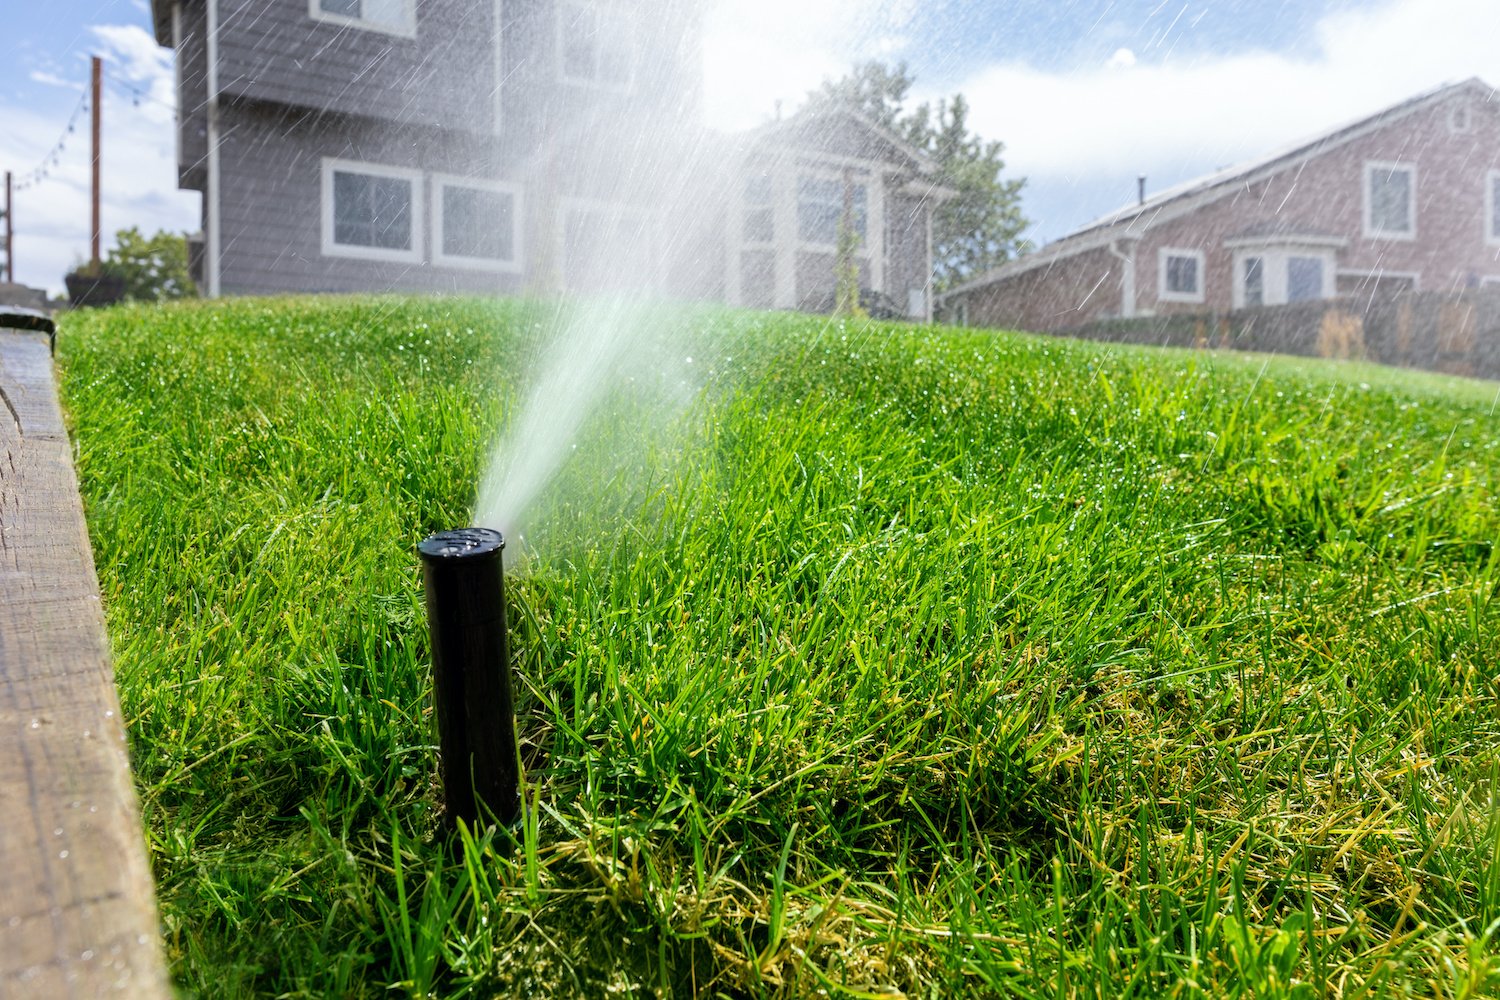 5 Irrigation Plumbing Issues Increasing Your Water Bill + How to Save